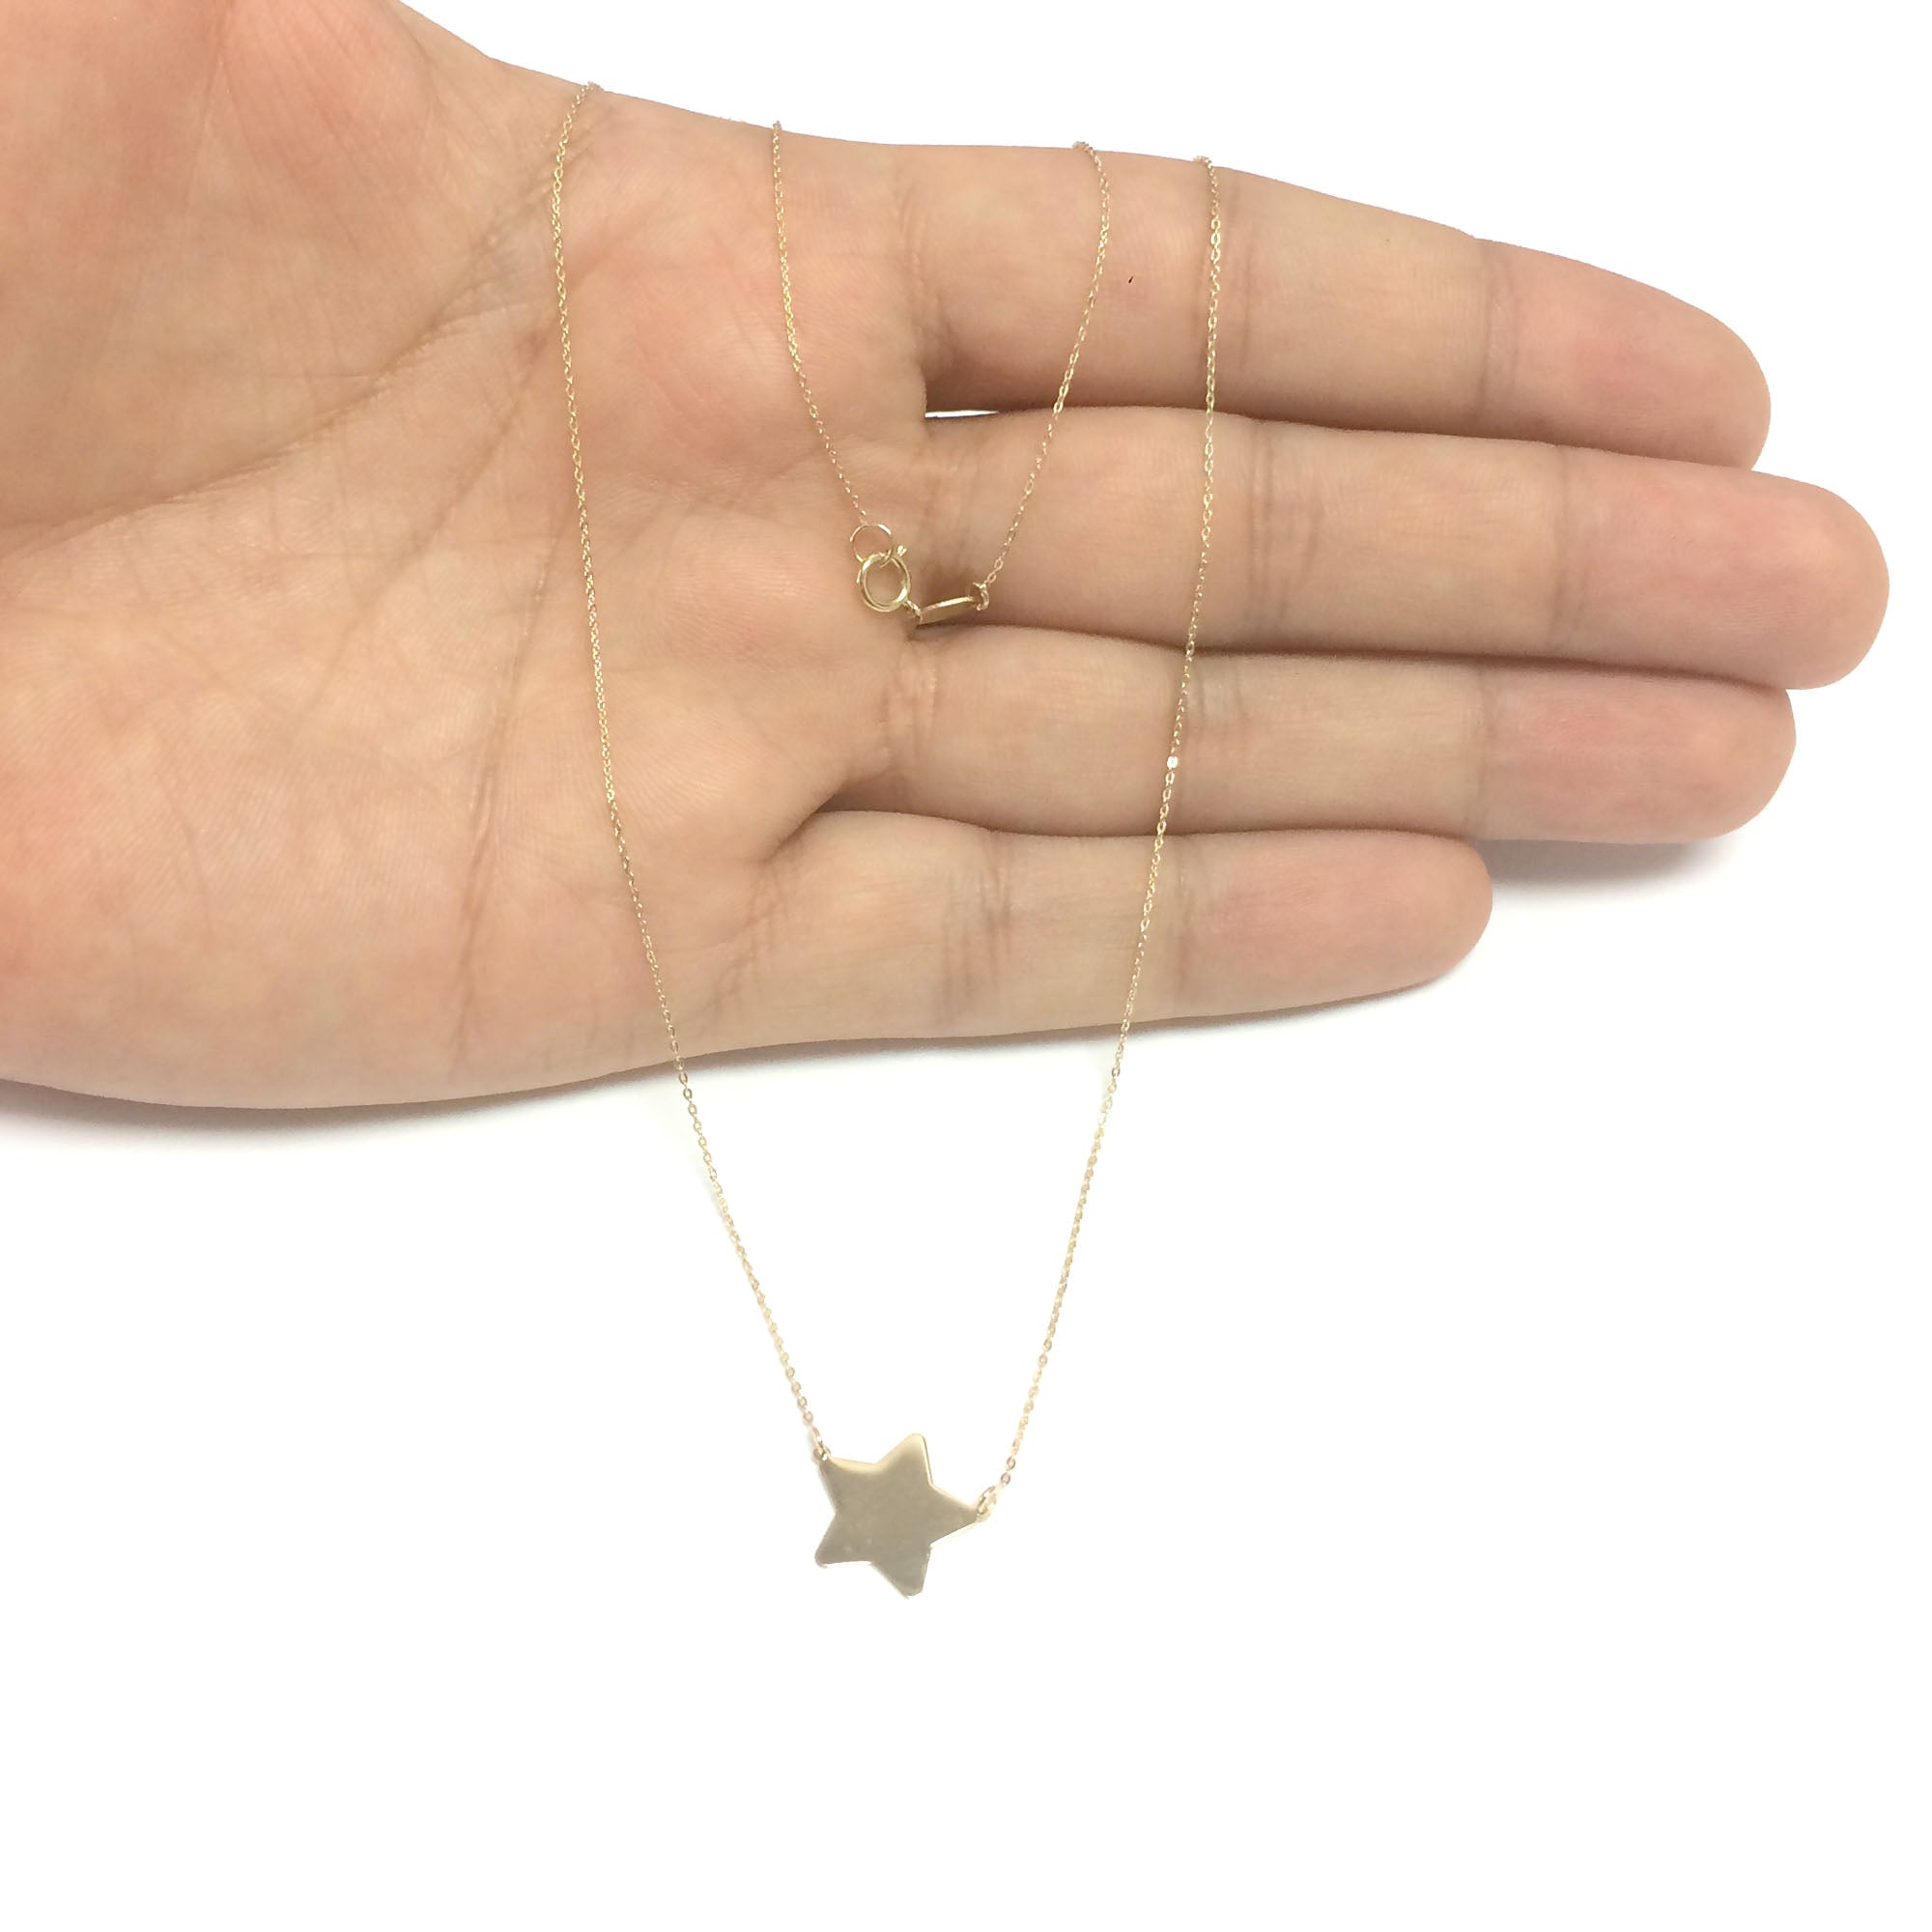 14k Yellow Gold Star Charm Necklace, 18" fine designer jewelry for men and women